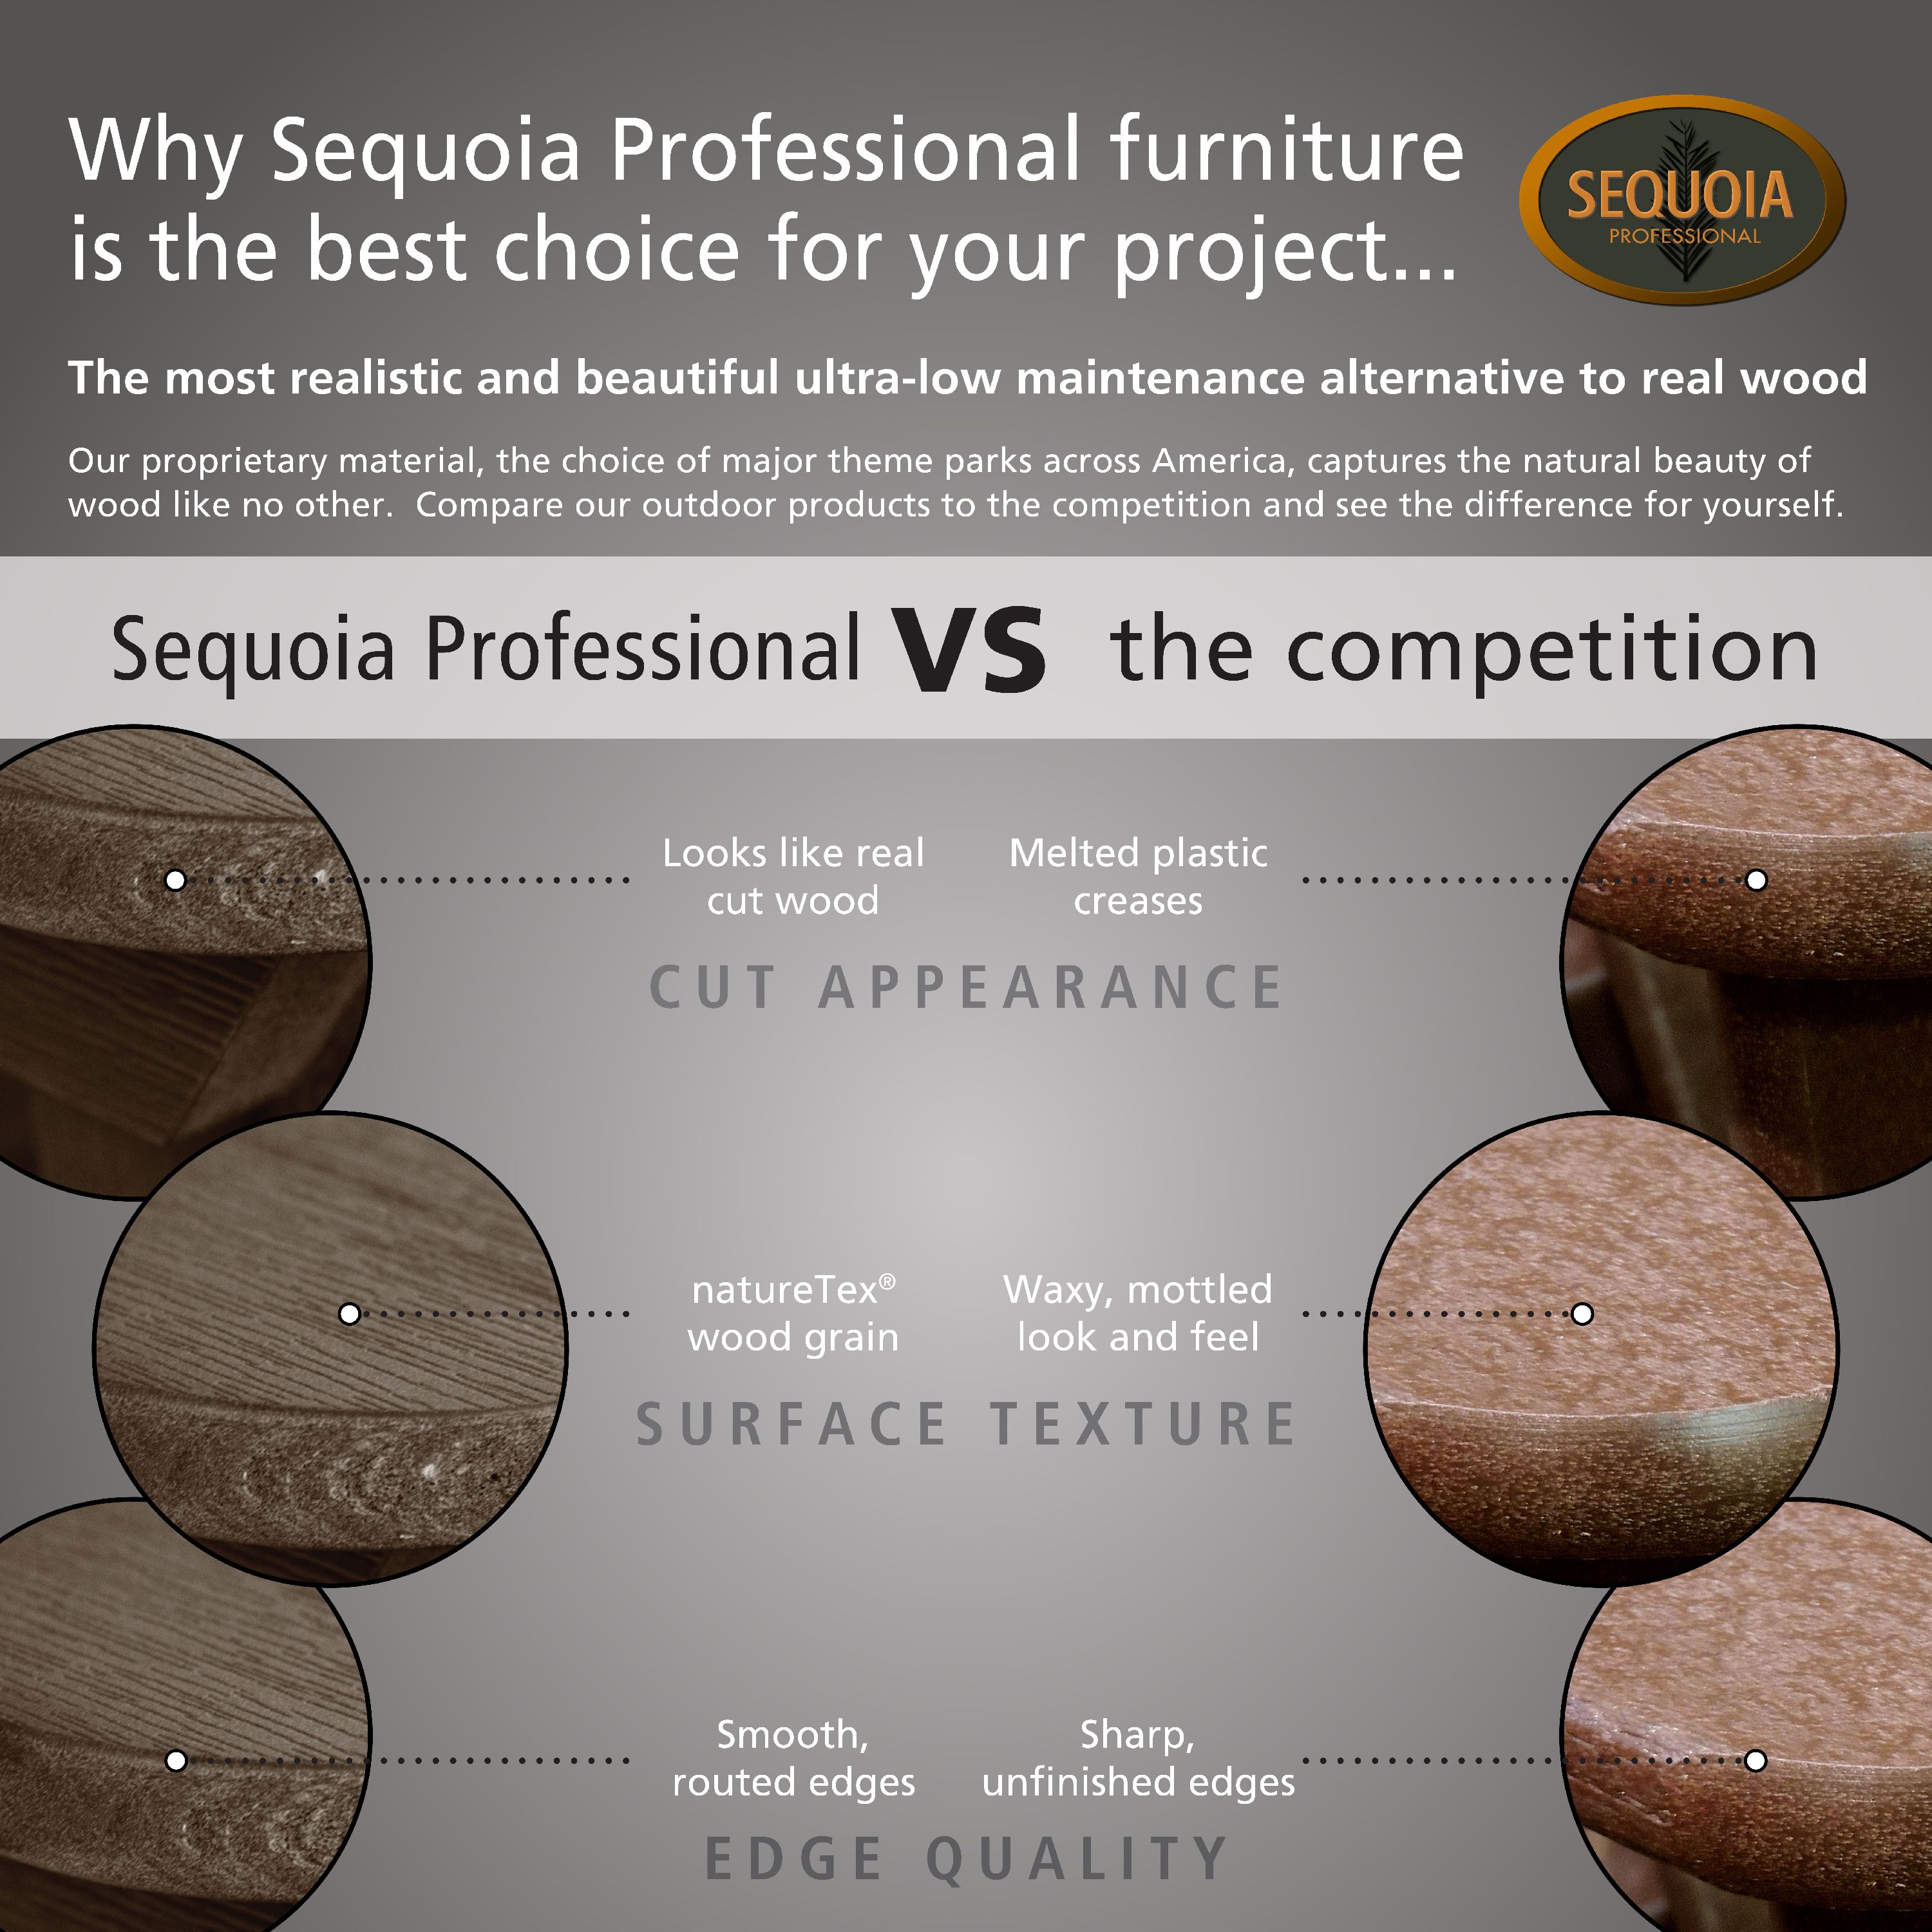 The Sequoia Professional Commercial Grade Glennville Lounge Chair - image 2 of 2